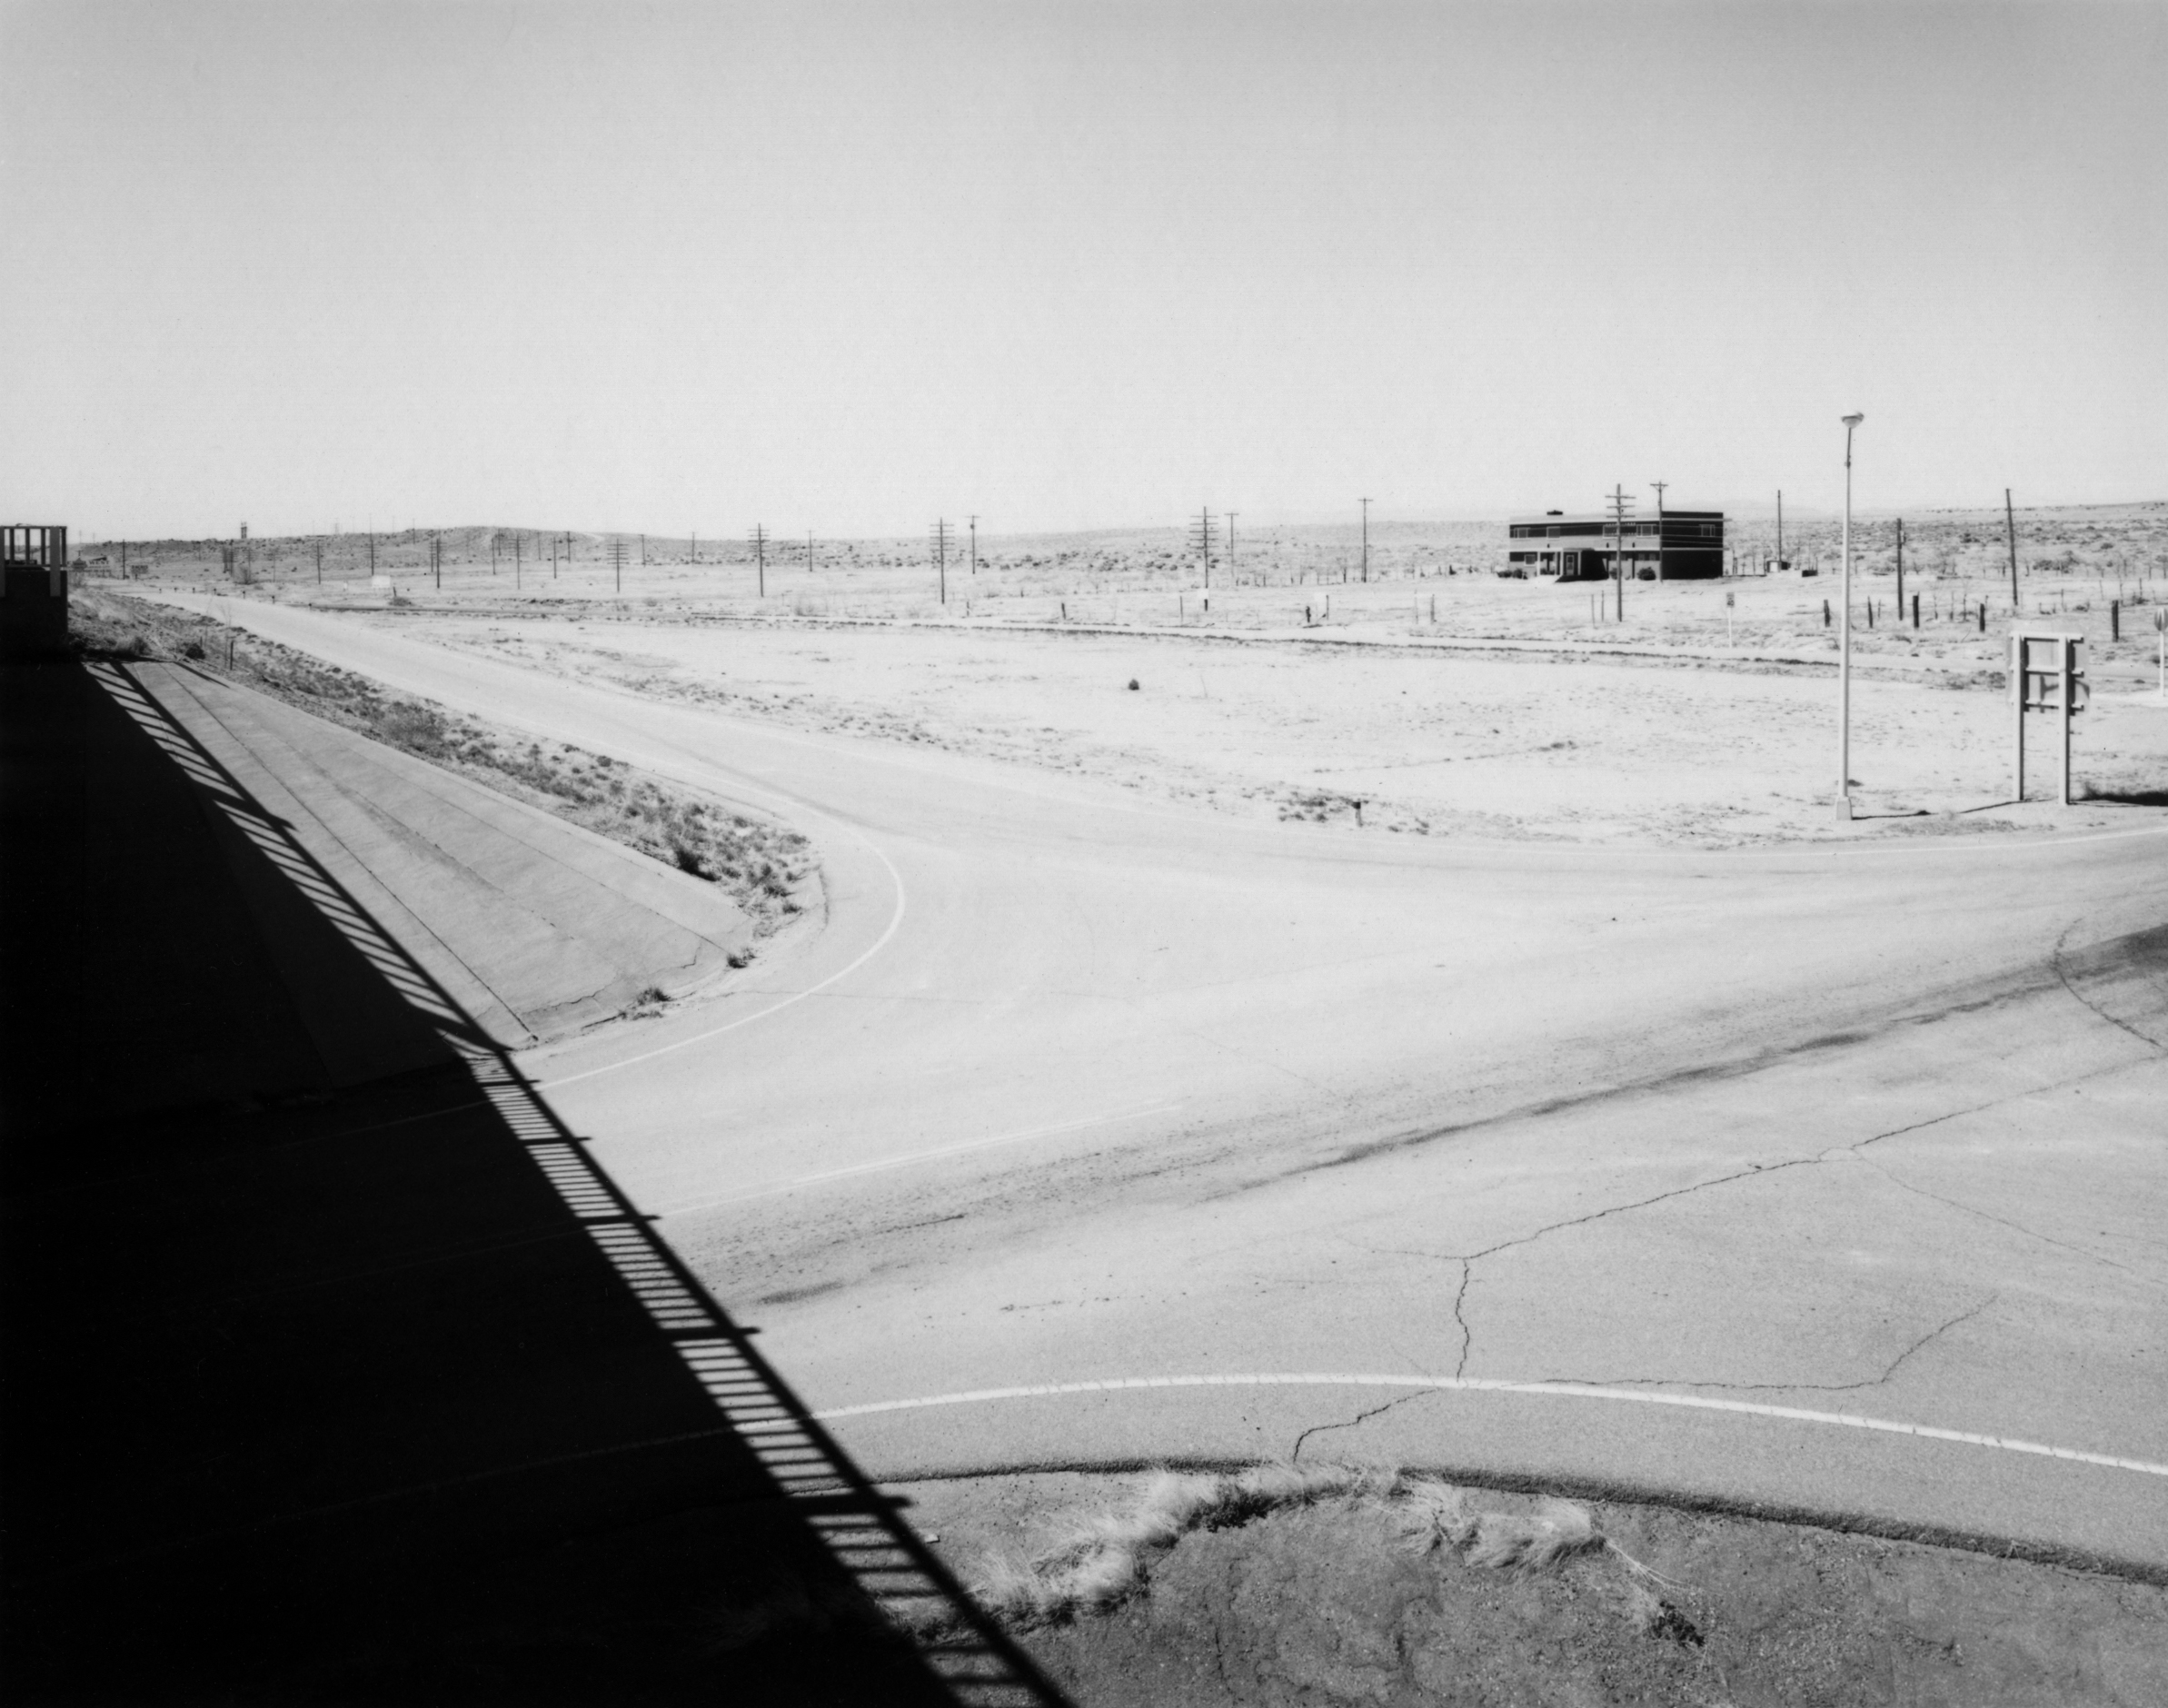 Black and white photograph of barren intersection with single building on the horizon